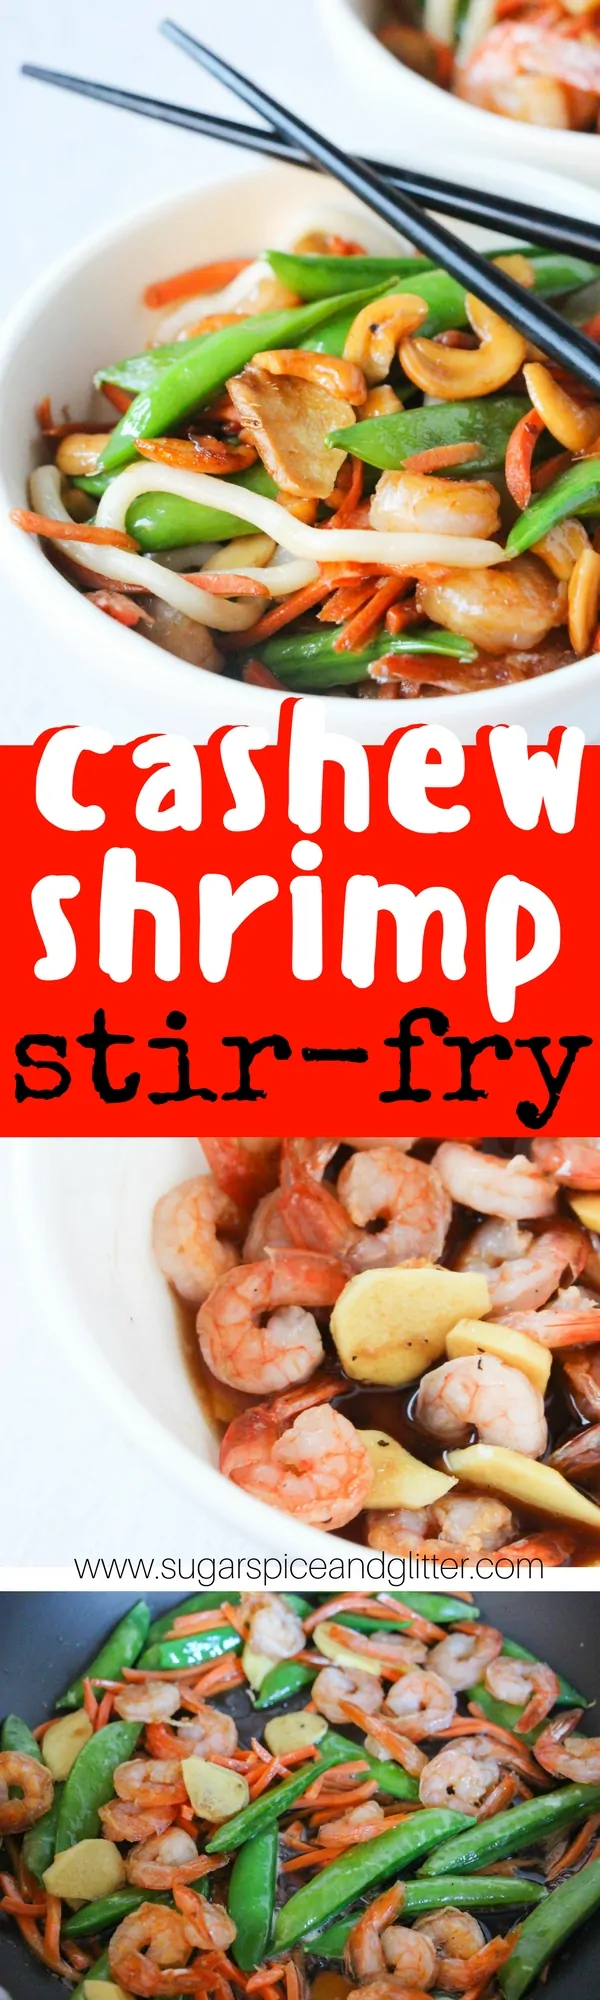 A delicious cashew shrimp stir-fry that costs less and tastes better than any take-out version! A copycat Asian recipe that your family will love